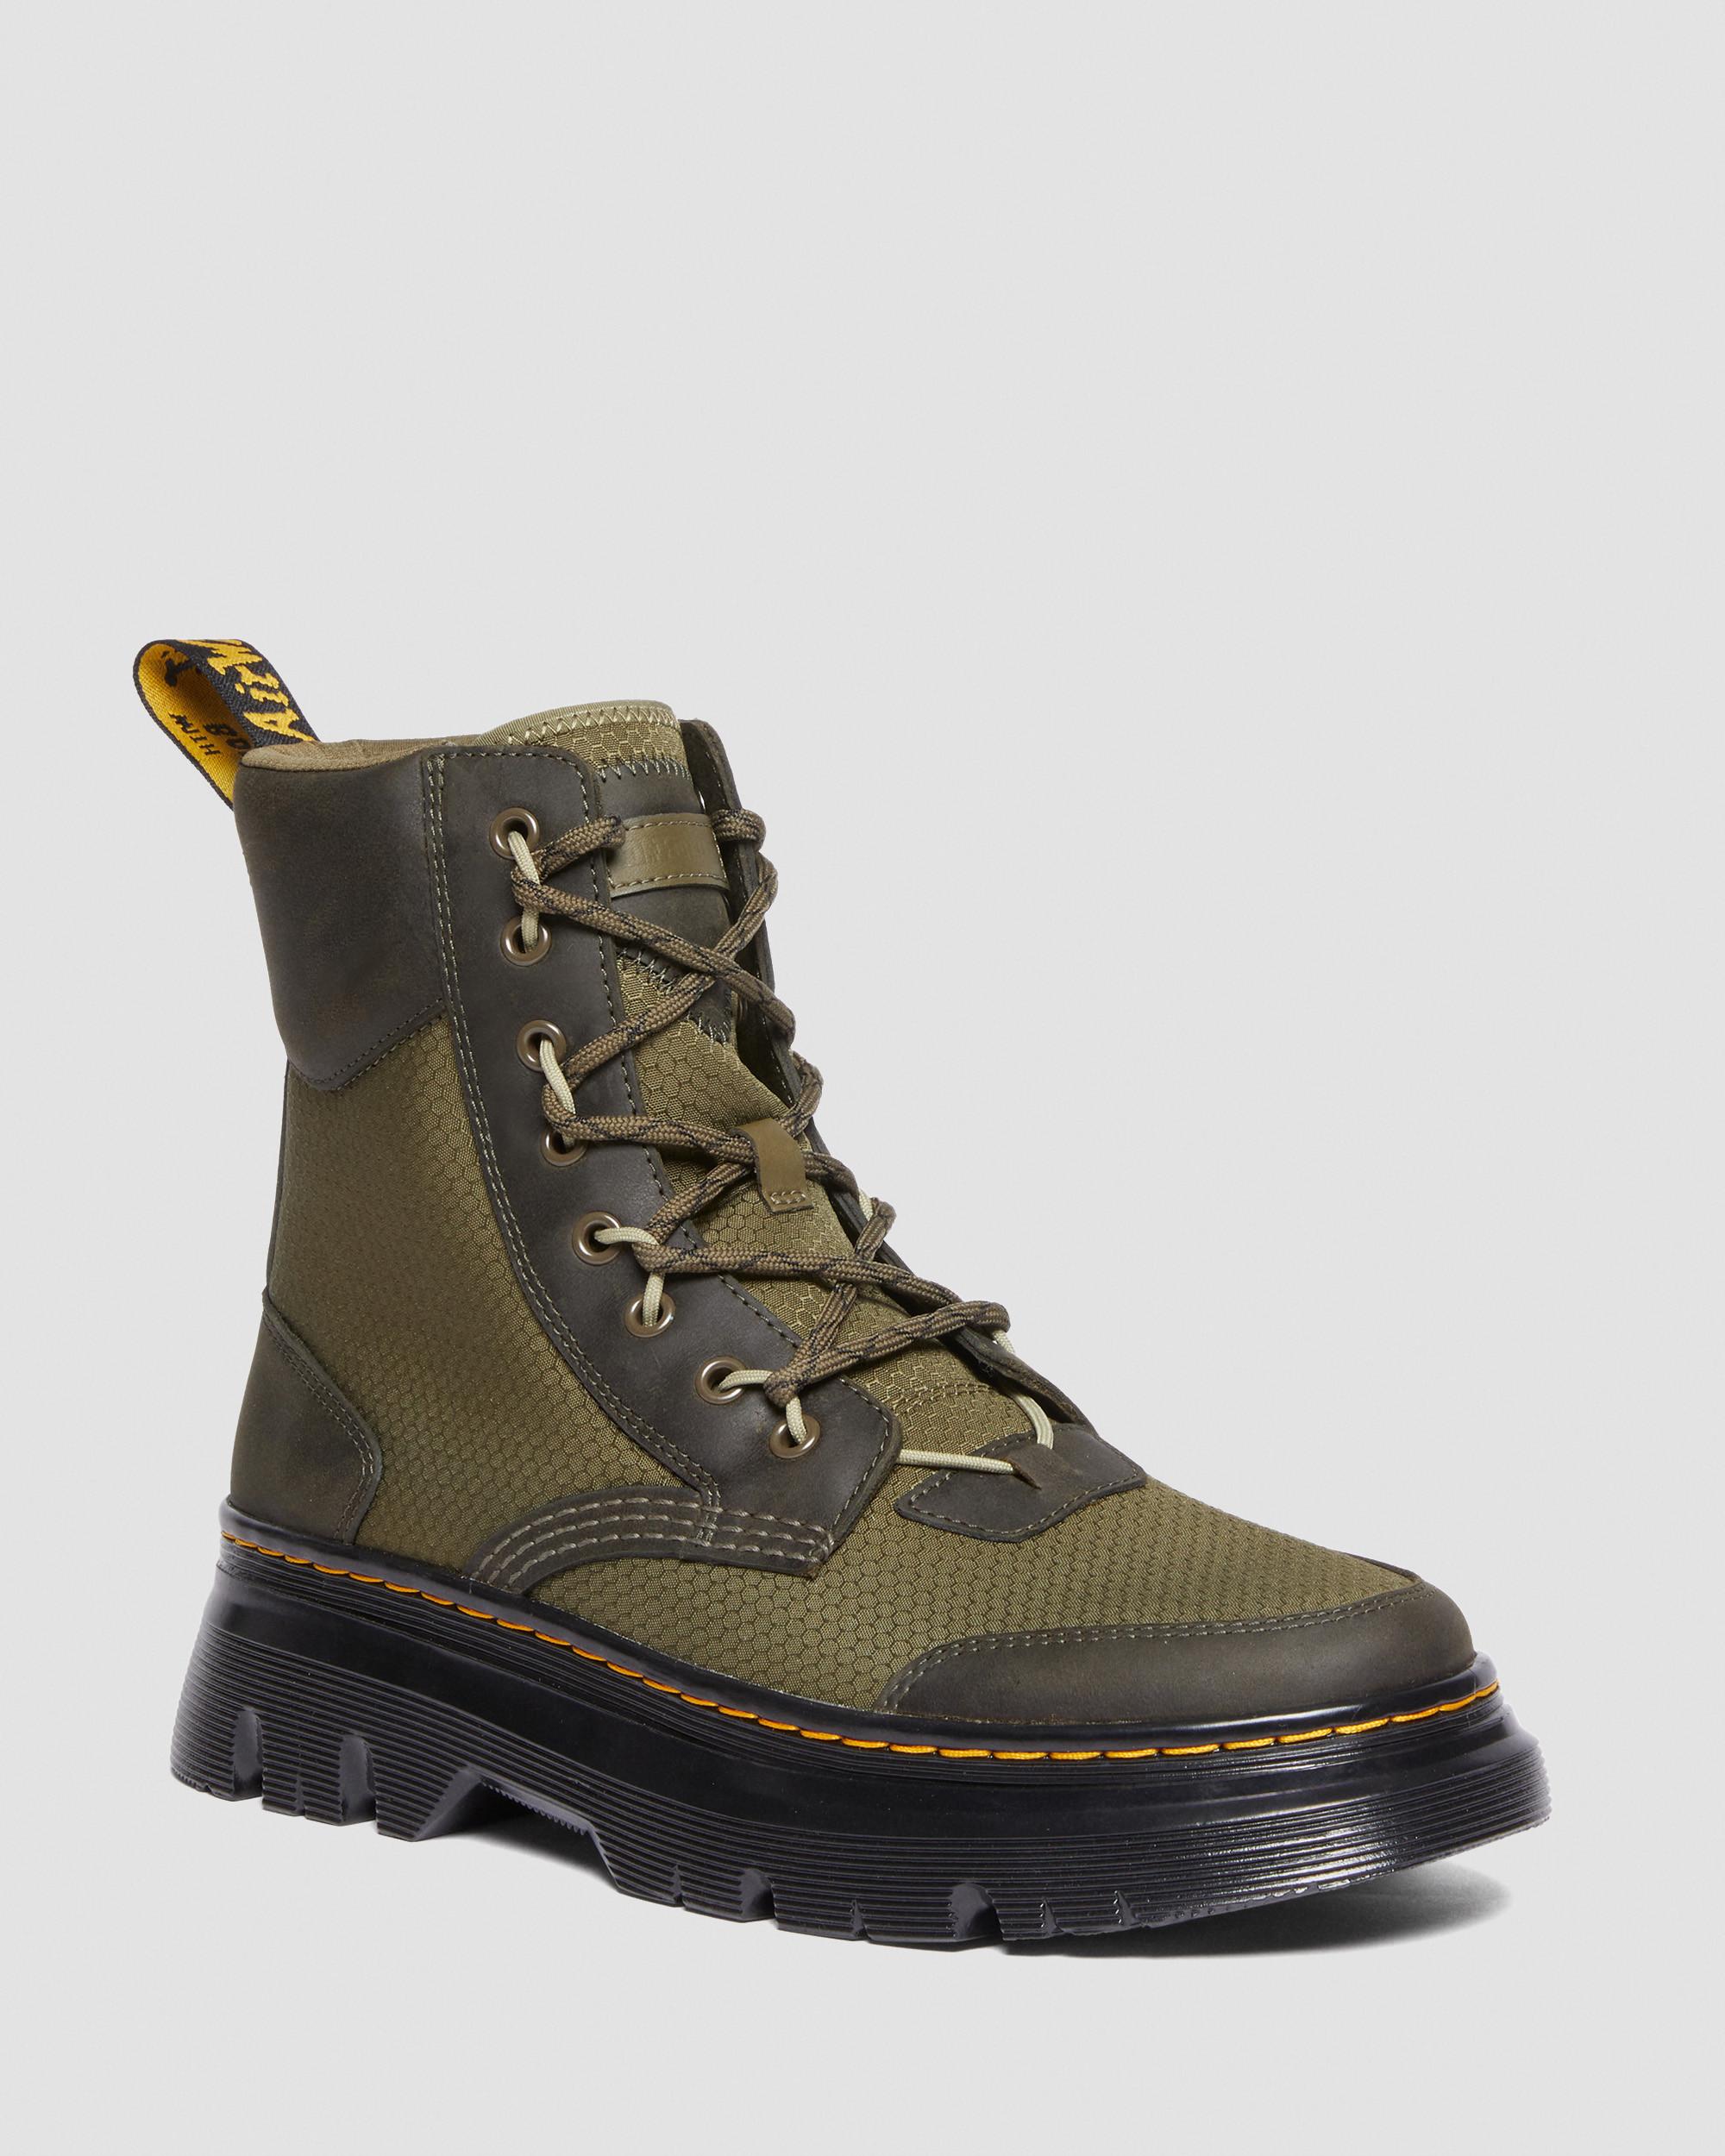 Tarik Leather & Nylon Utility Boots in Olive | Dr. Martens